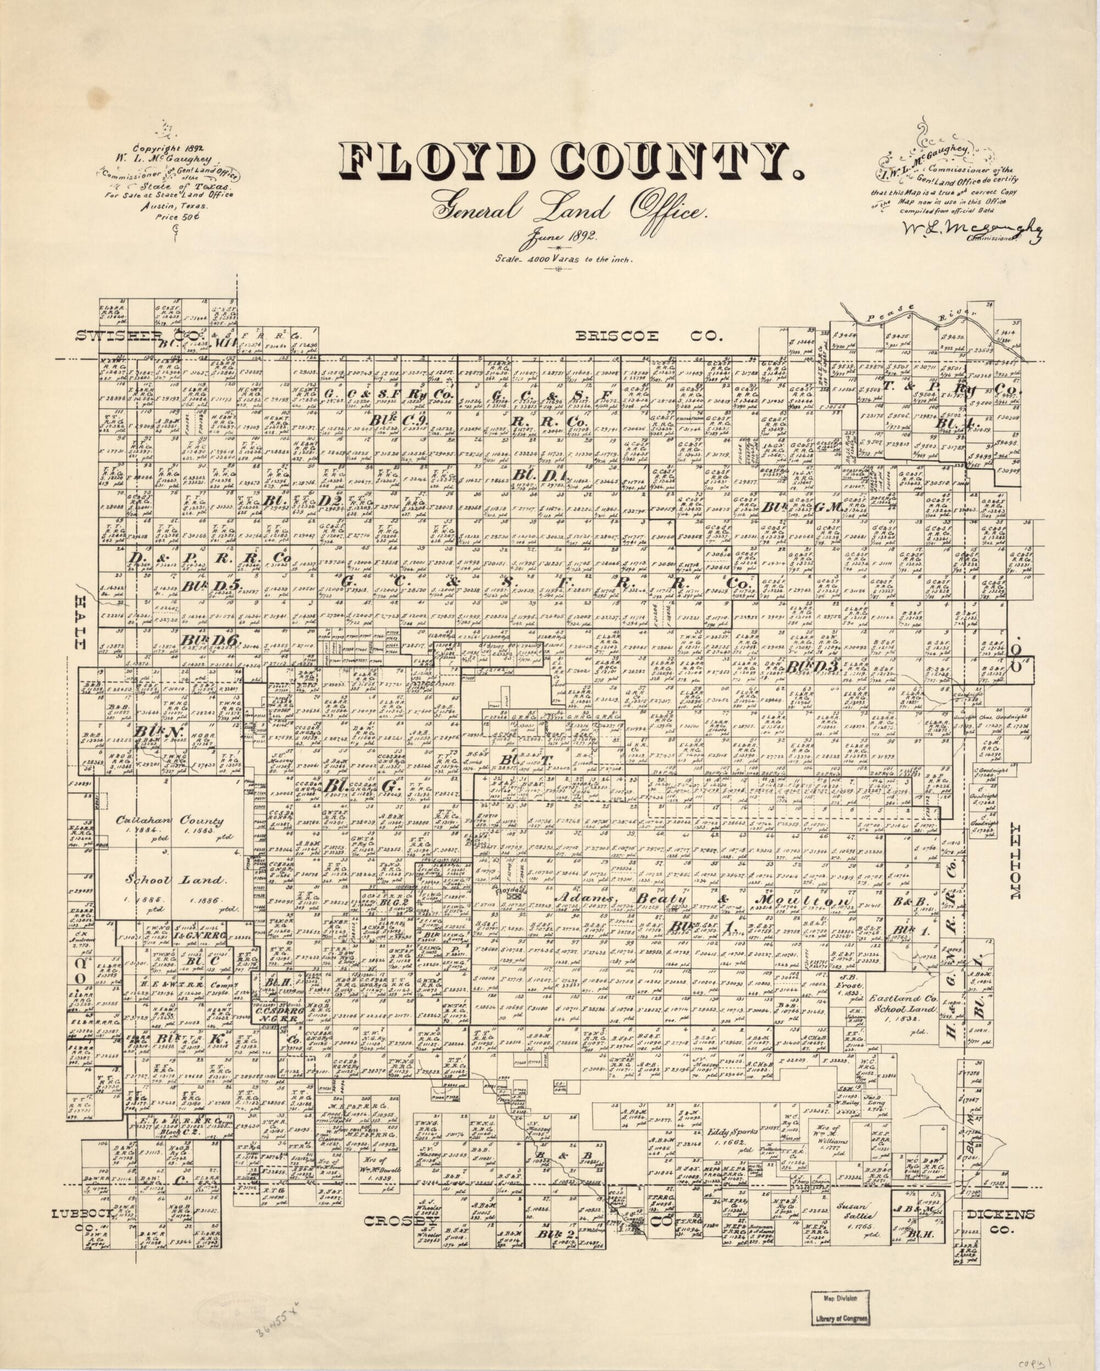 This old map of Floyd County : General Land Office, June from 1892 was created by W. L. McGaughey,  Texas. General Land Office in 1892